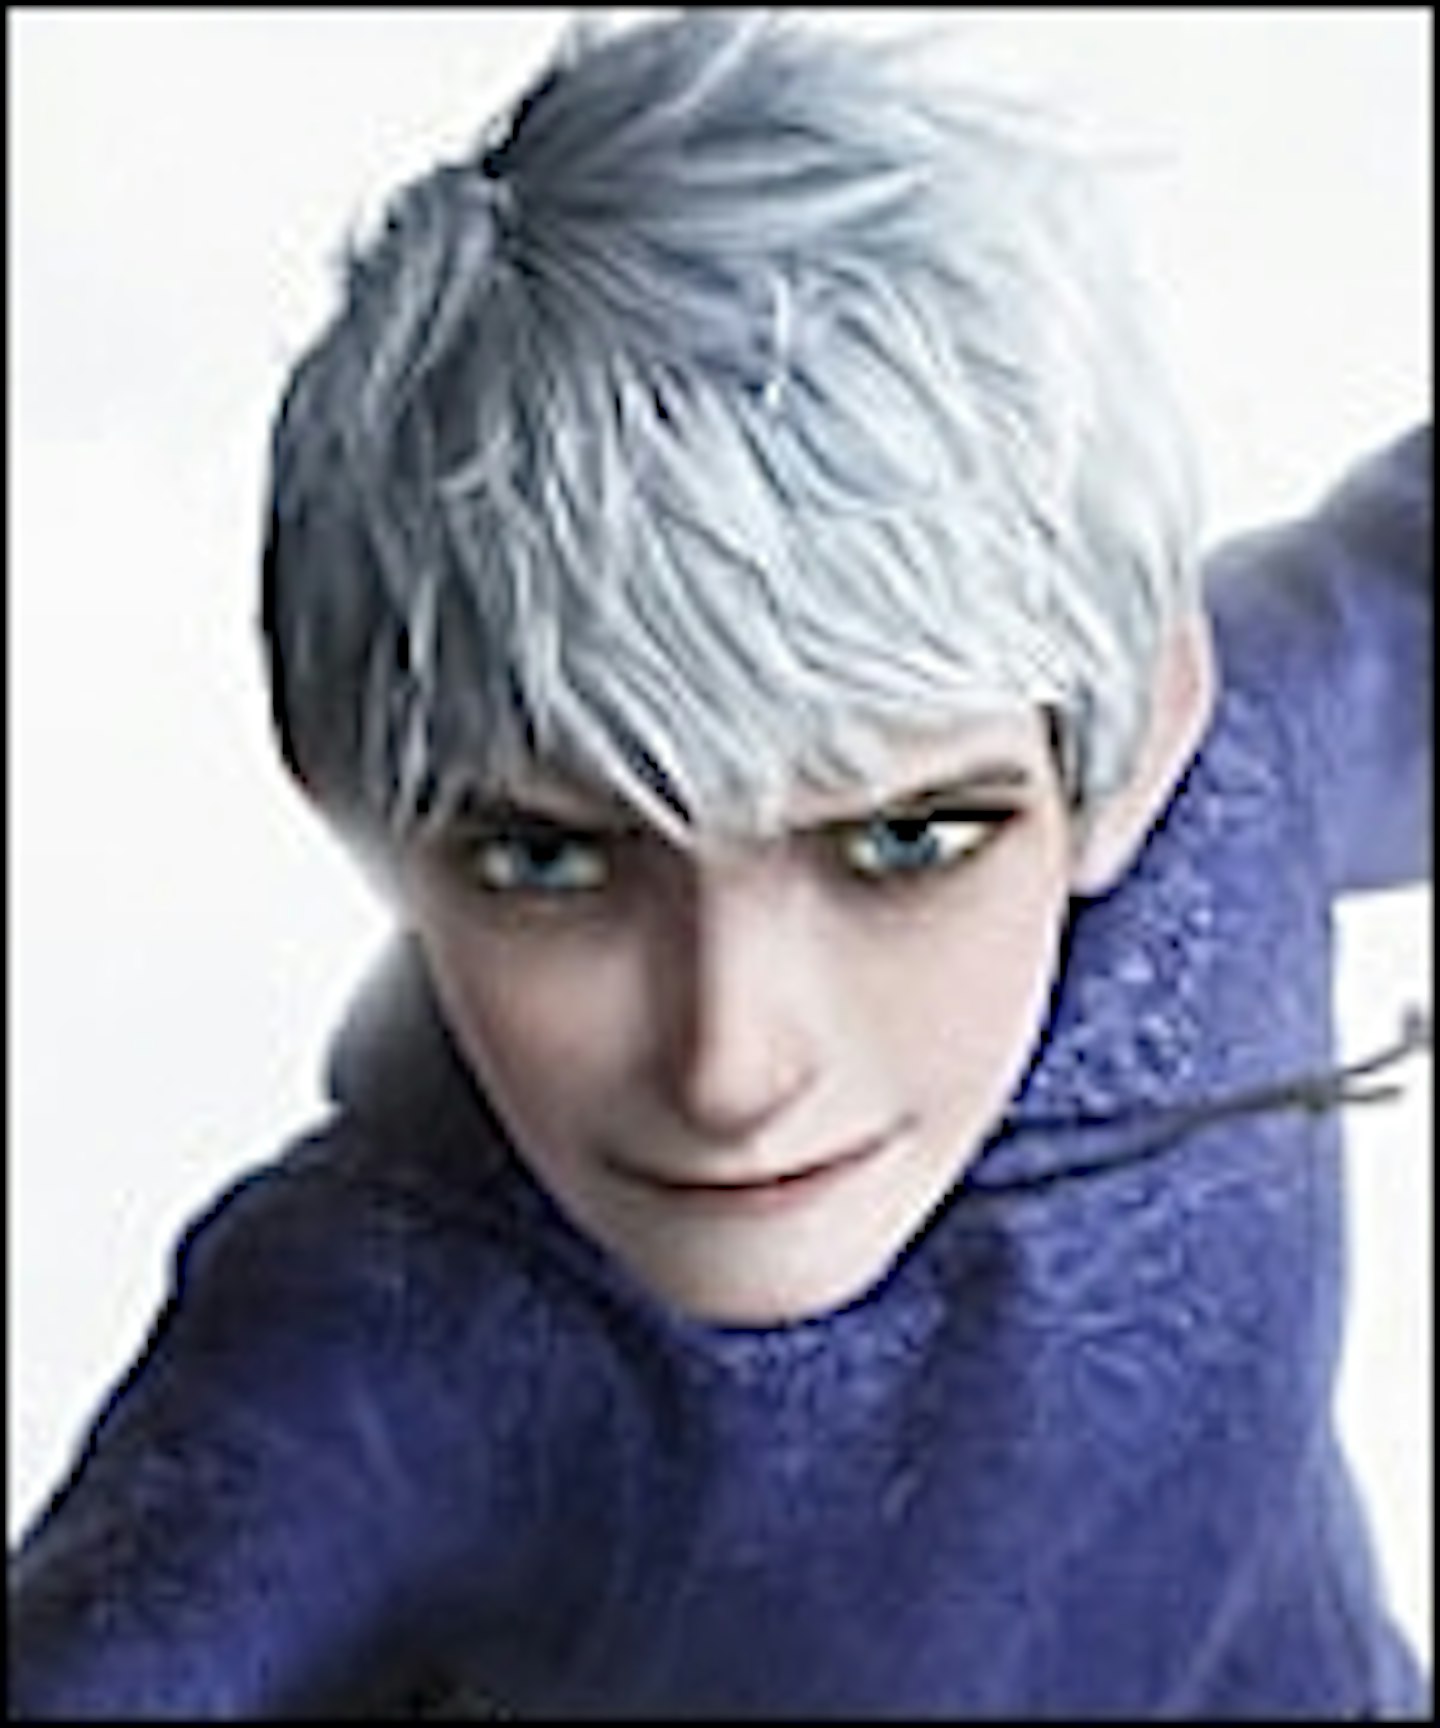 New Rise Of The Guardians Trailer